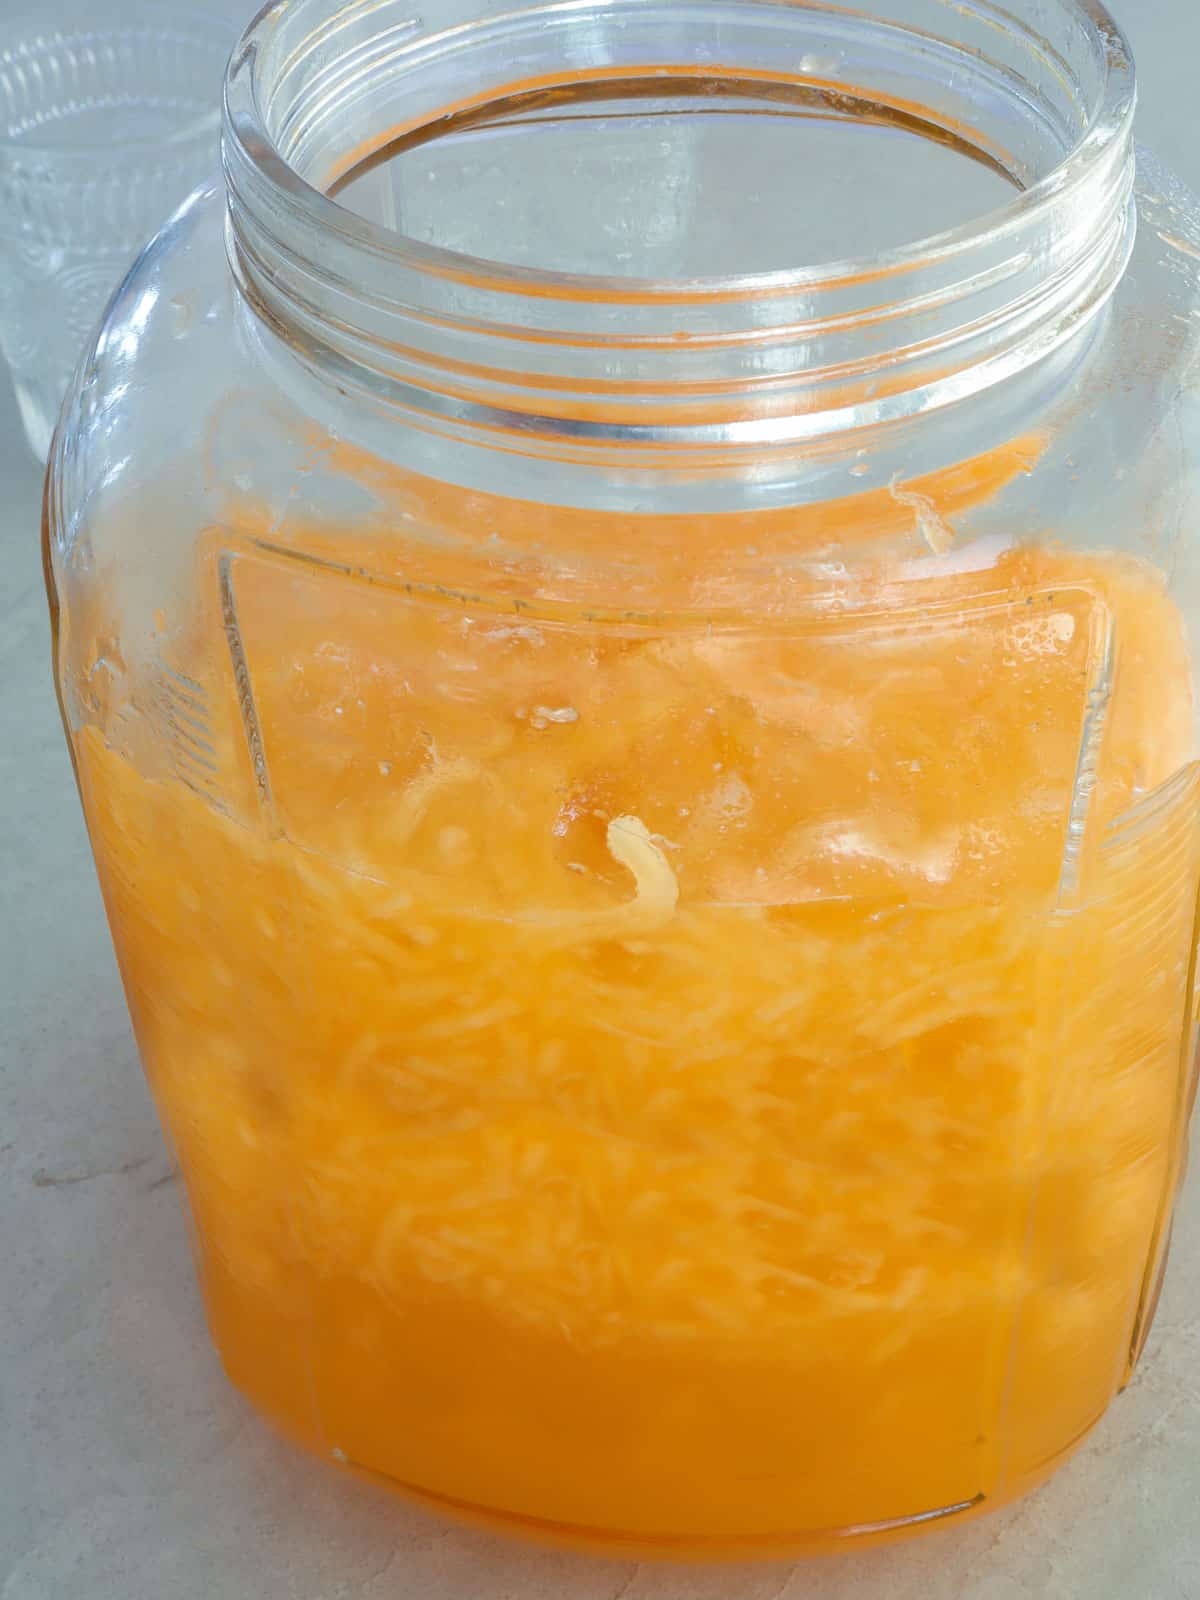 Melon Juice in a glass jar with ice